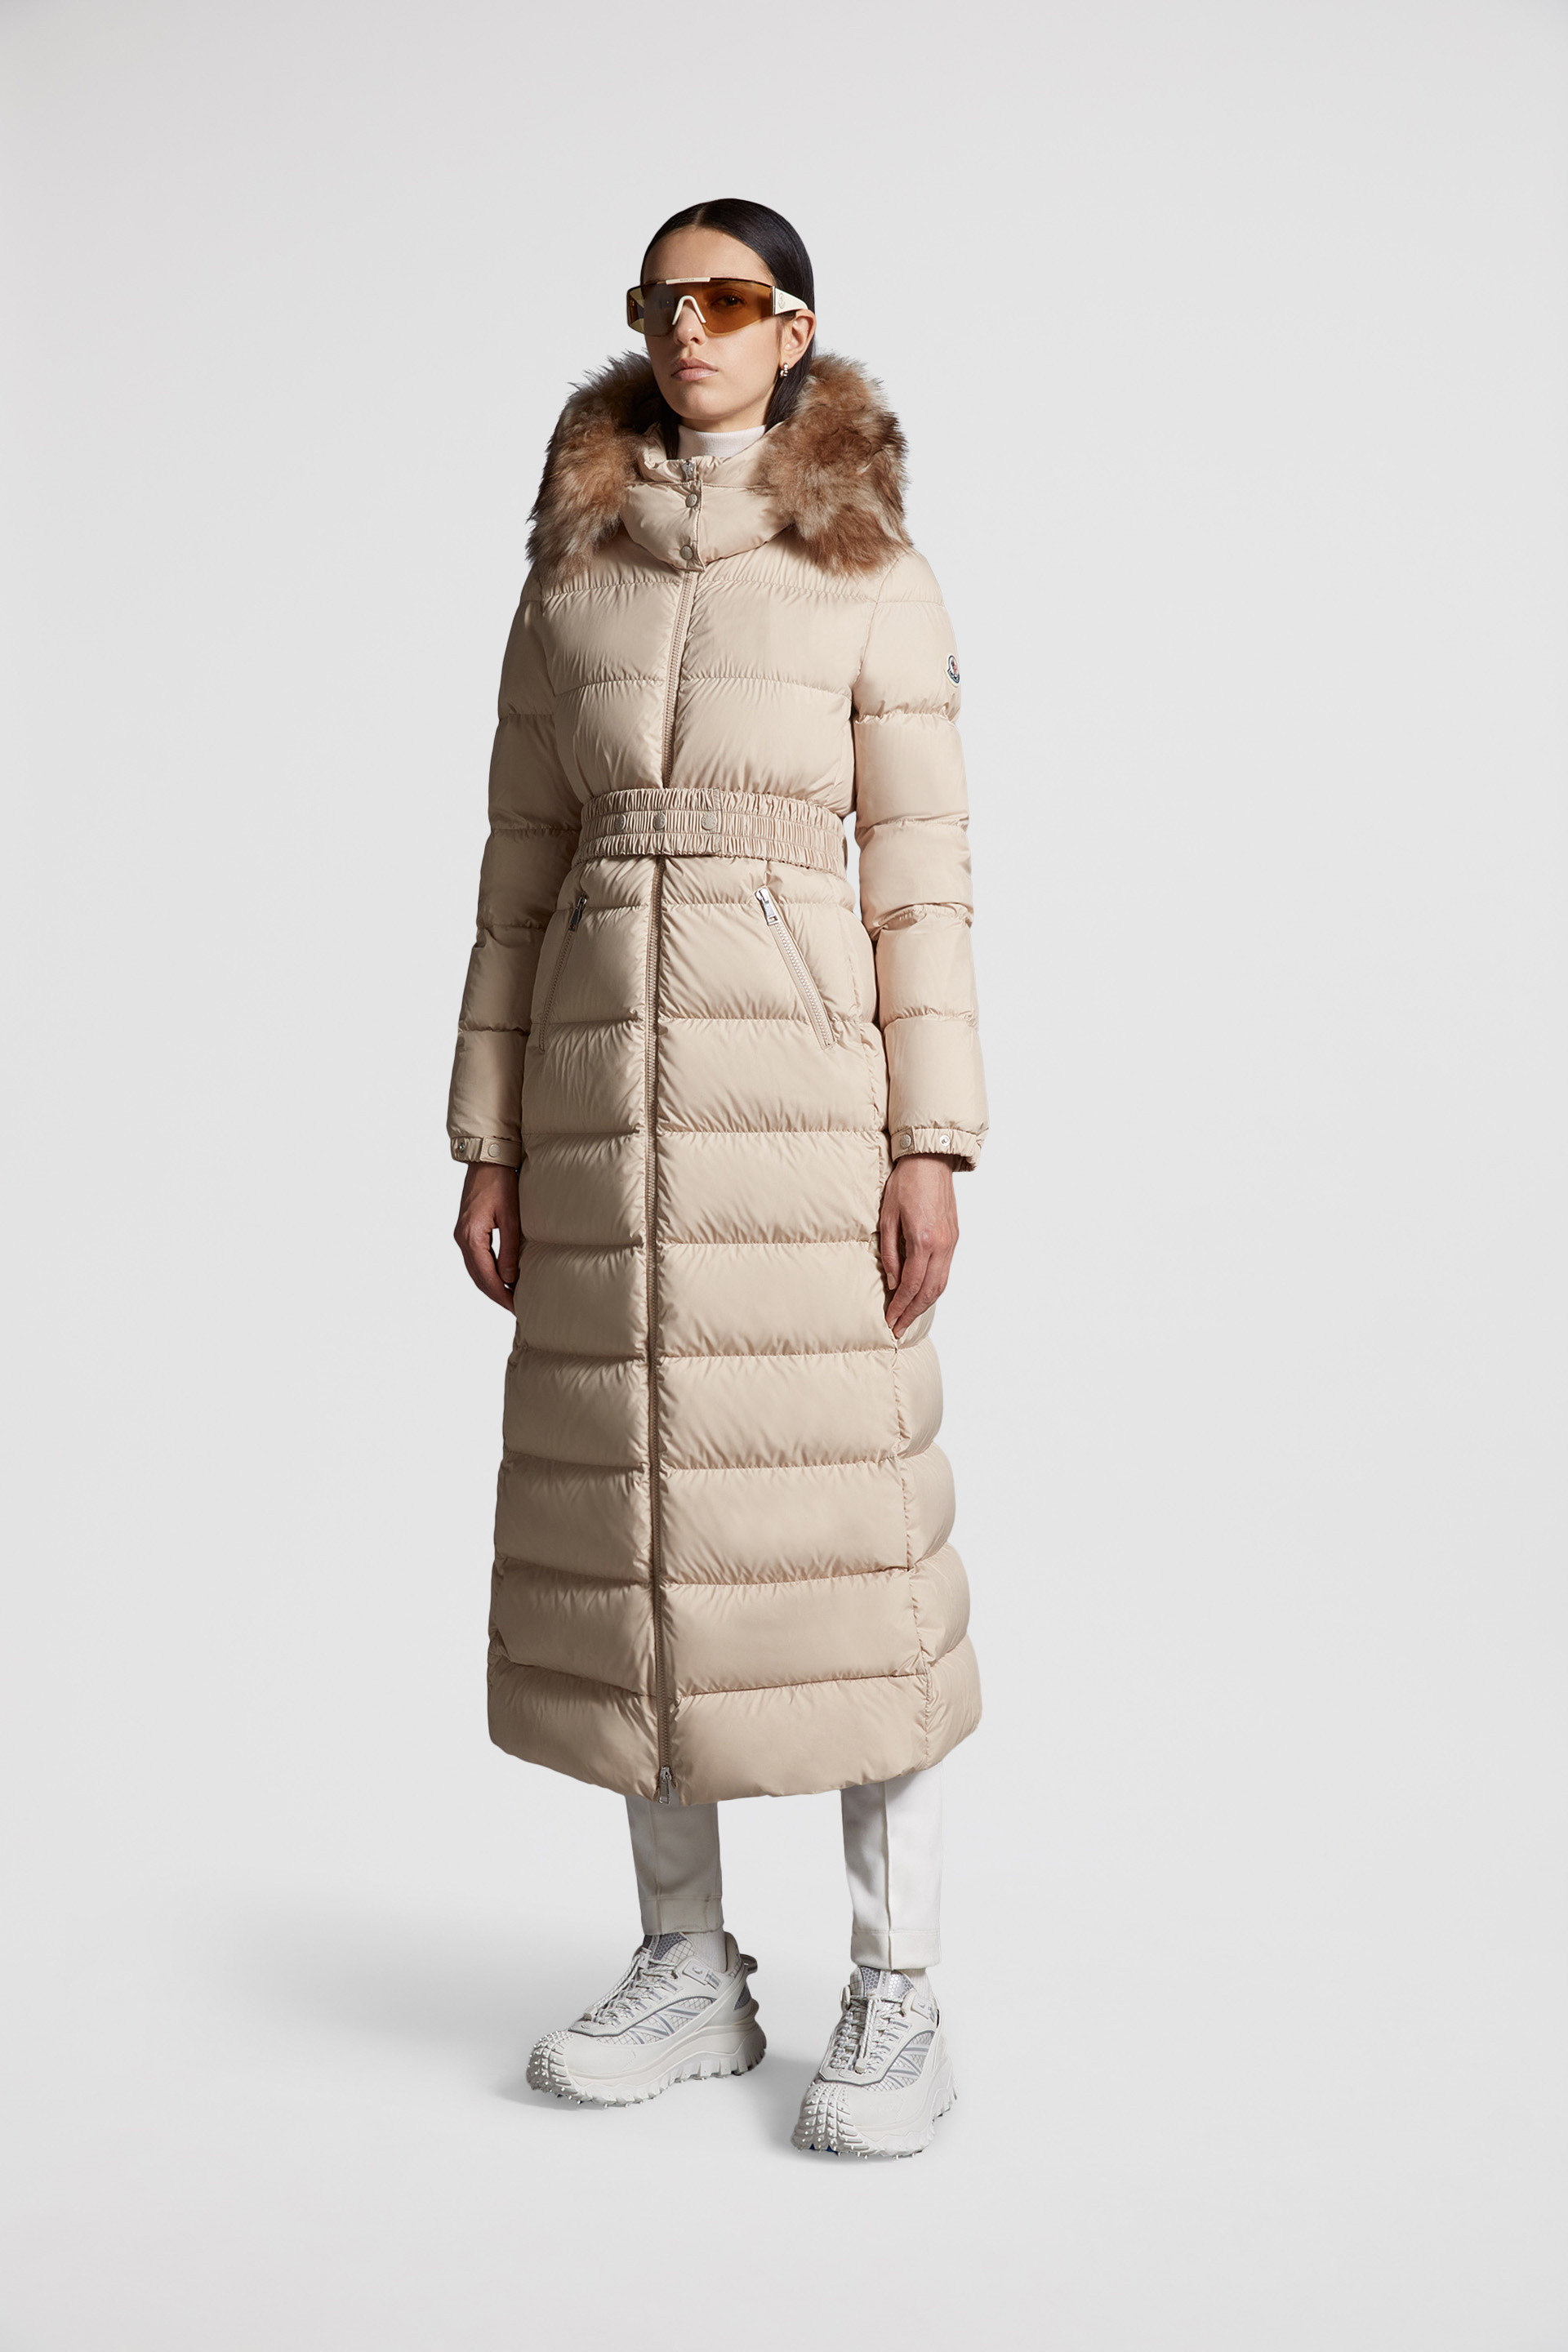 Womens Extra Long White Duck Down Parka With Fur Hood Warm Winter Outerwear  For Women In Plus Sizes S 4XL From Cupidcloth, $143.25 | DHgate.Com